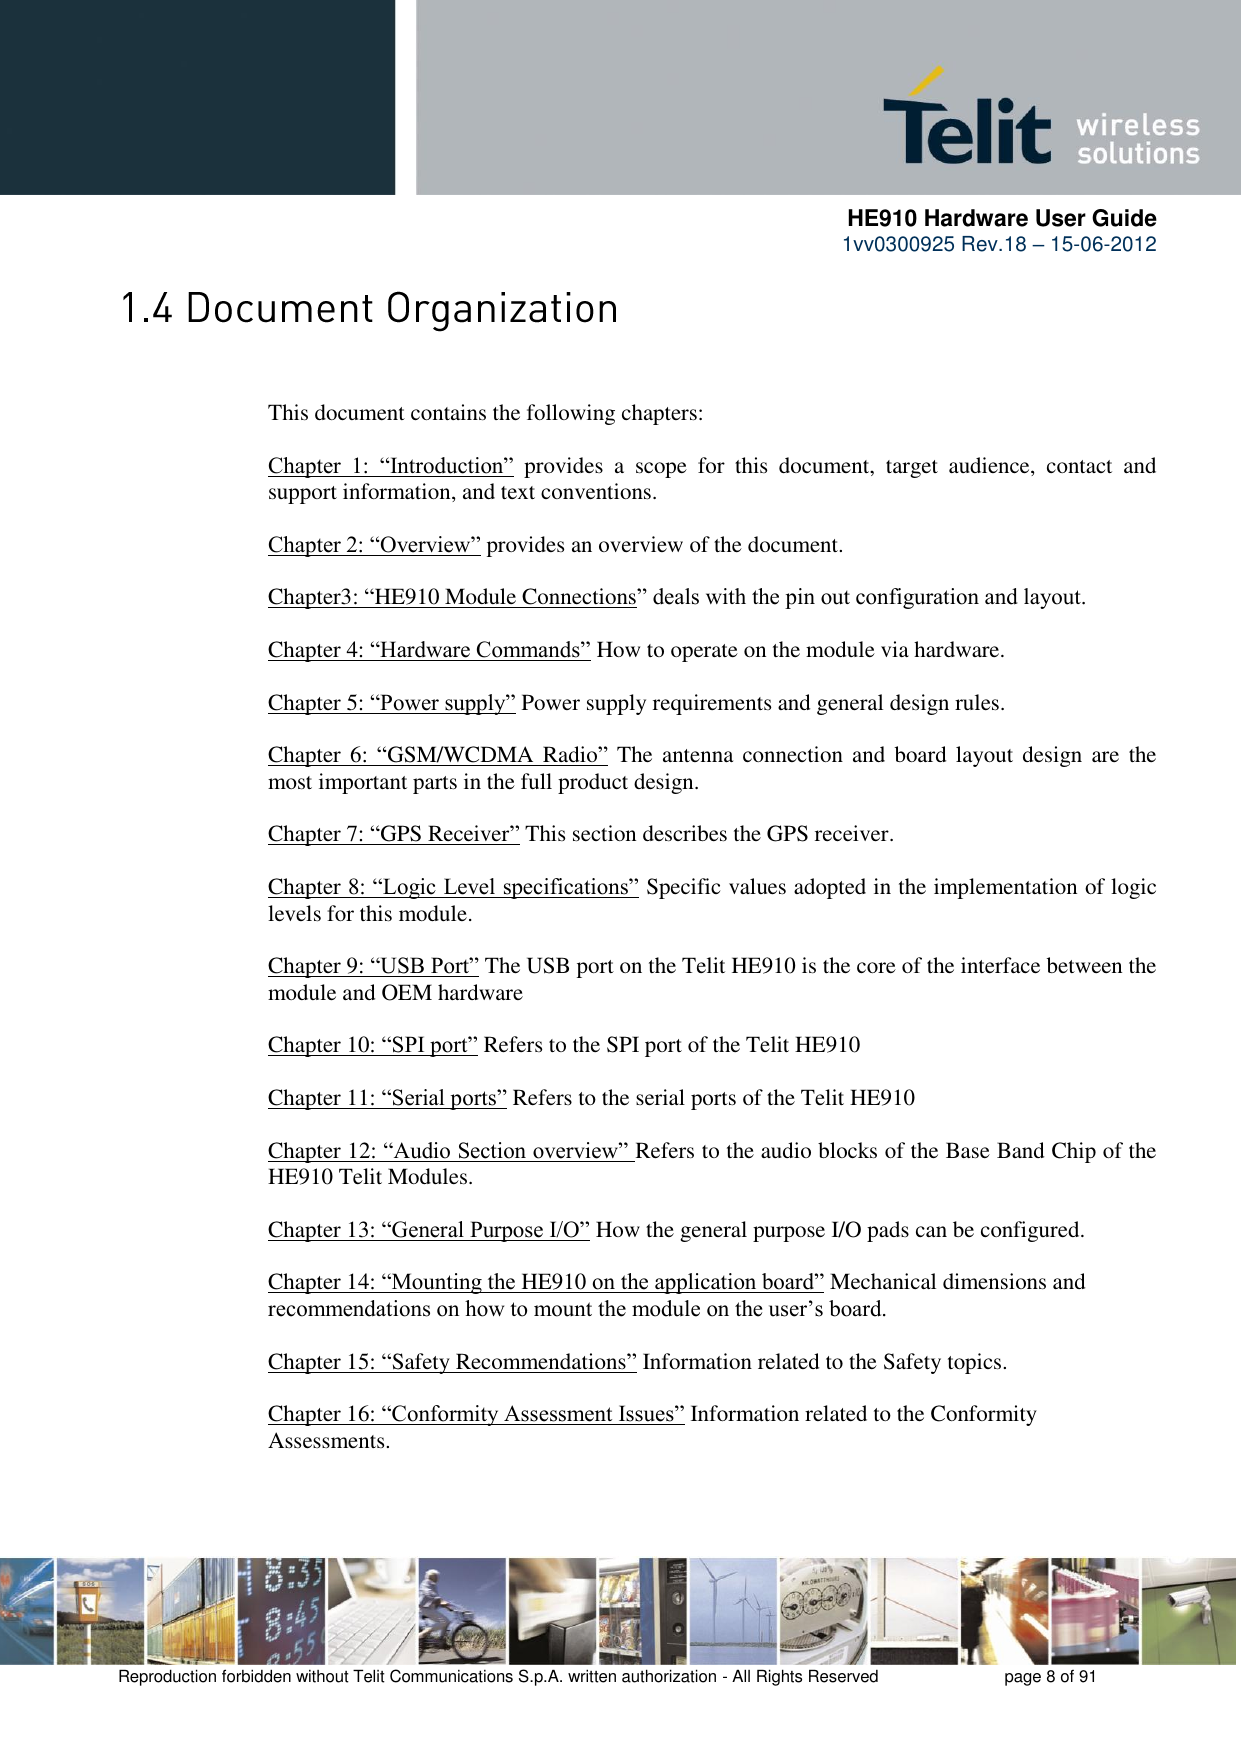      HE910 Hardware User Guide 1vv0300925 Rev.18 – 15-06-2012    Reproduction forbidden without Telit Communications S.p.A. written authorization - All Rights Reserved    page 8 of 91   This document contains the following chapters:  Chapter  1:  “Introduction”  provides  a  scope  for  this  document,  target  audience,  contact  and support information, and text conventions.  Chapter 2: “Overview” provides an overview of the document.  Chapter3: “HE910 Module Connections” deals with the pin out configuration and layout.  Chapter 4: “Hardware Commands” How to operate on the module via hardware.  Chapter 5: “Power supply” Power supply requirements and general design rules.  Chapter 6:  “GSM/WCDMA Radio”  The antenna connection and  board layout  design  are  the most important parts in the full product design.  Chapter 7: “GPS Receiver” This section describes the GPS receiver.  Chapter 8: “Logic Level specifications” Specific values adopted in the implementation of logic levels for this module.            Chapter 9: “USB Port” The USB port on the Telit HE910 is the core of the interface between the module and OEM hardware  Chapter 10: “SPI port” Refers to the SPI port of the Telit HE910   Chapter 11: “Serial ports” Refers to the serial ports of the Telit HE910   Chapter 12: “Audio Section overview” Refers to the audio blocks of the Base Band Chip of the HE910 Telit Modules.  Chapter 13: “General Purpose I/O” How the general purpose I/O pads can be configured.  Chapter 14: “Mounting the HE910 on the application board” Mechanical dimensions and recommendations on how to mount the module on the user’s board.  Chapter 15: “Safety Recommendations” Information related to the Safety topics.  Chapter 16: “Conformity Assessment Issues” Information related to the Conformity Assessments.  